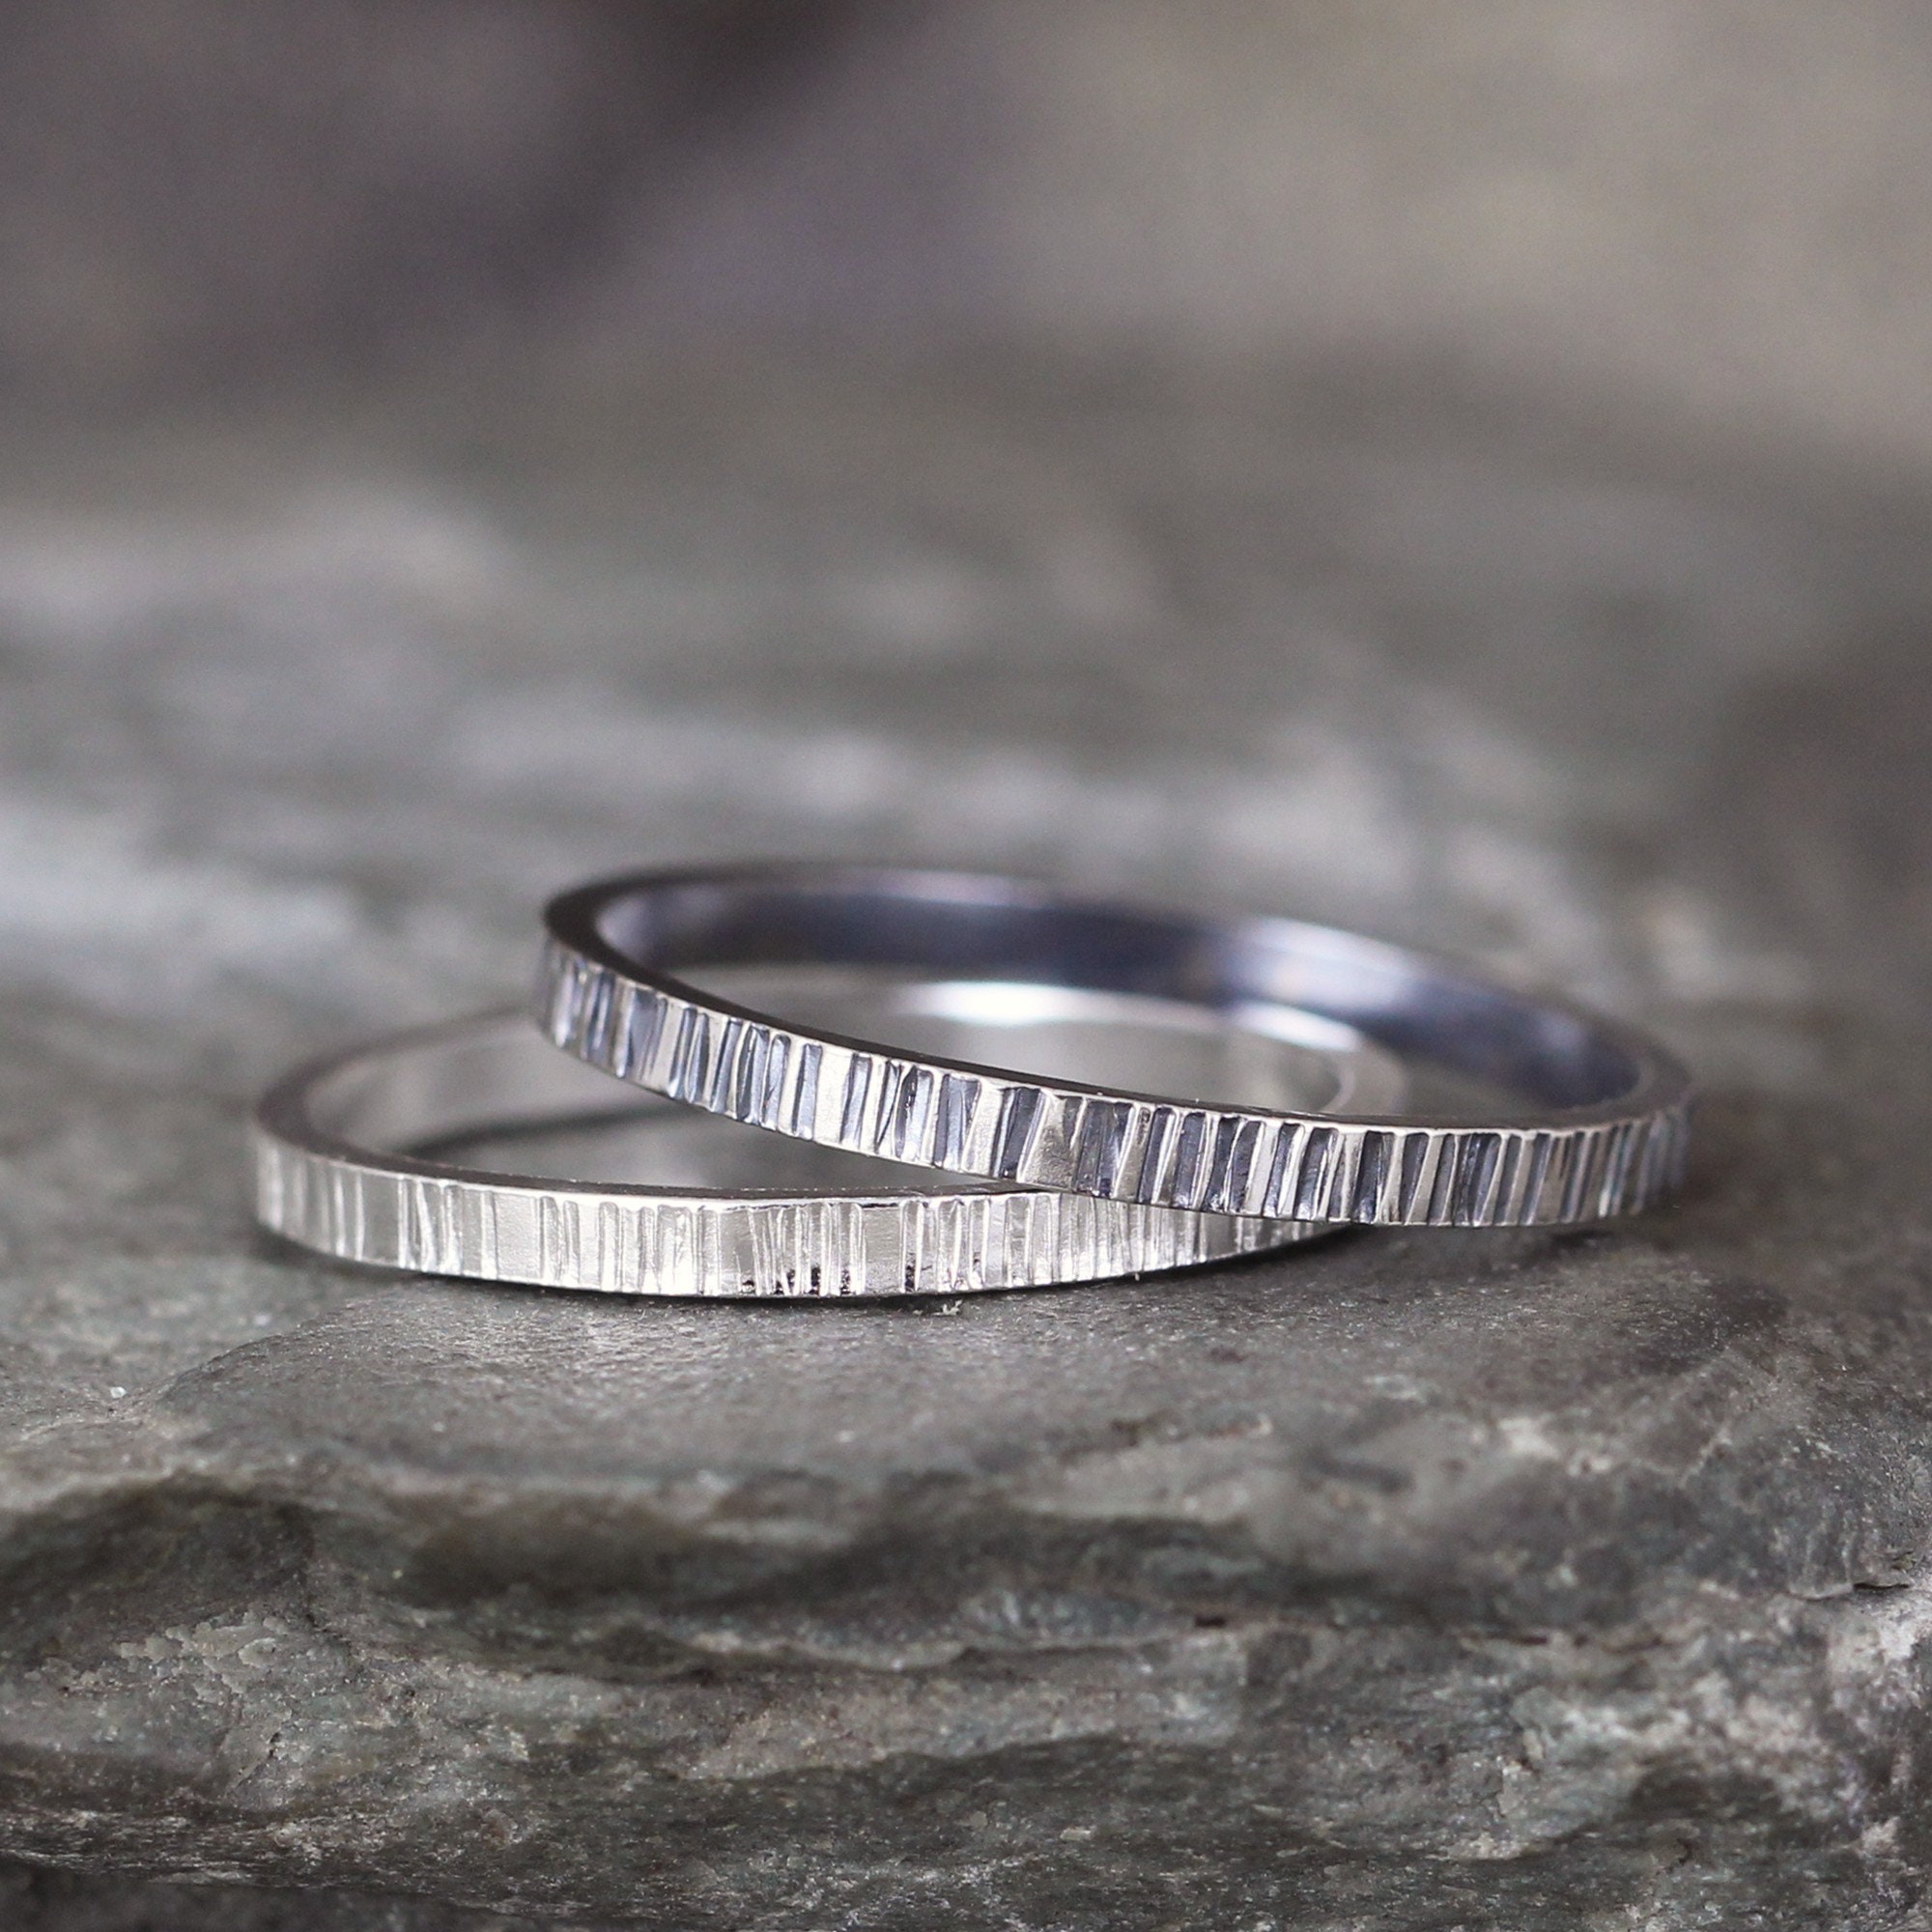 Handmade 2mm Solid Sterling Silver Bark Hammered Texture Ring